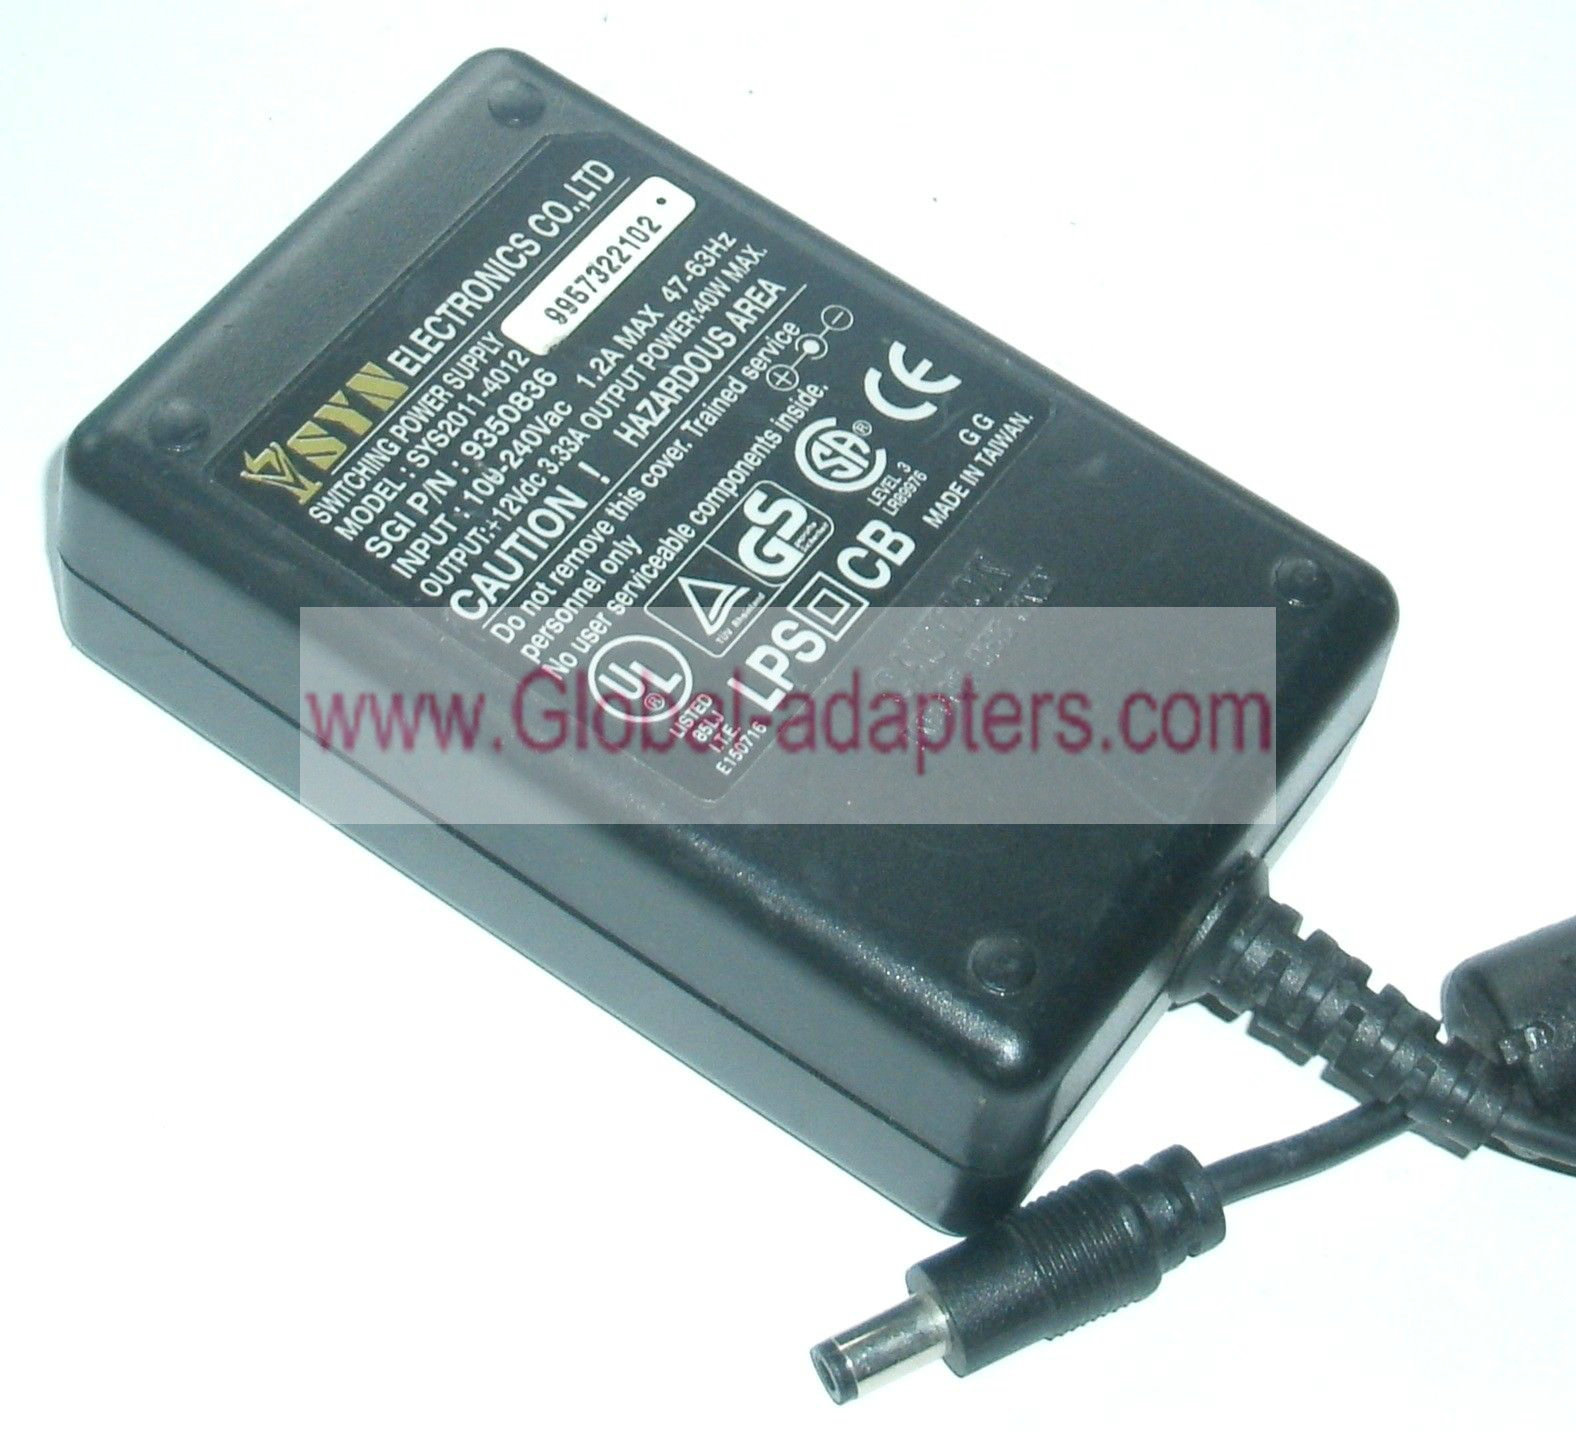 NEW SYN ELECTRONICS SWITCHING POWER SUPPLY SYS2011-4012 12V 3.33A 40W 9350836 ac adapter